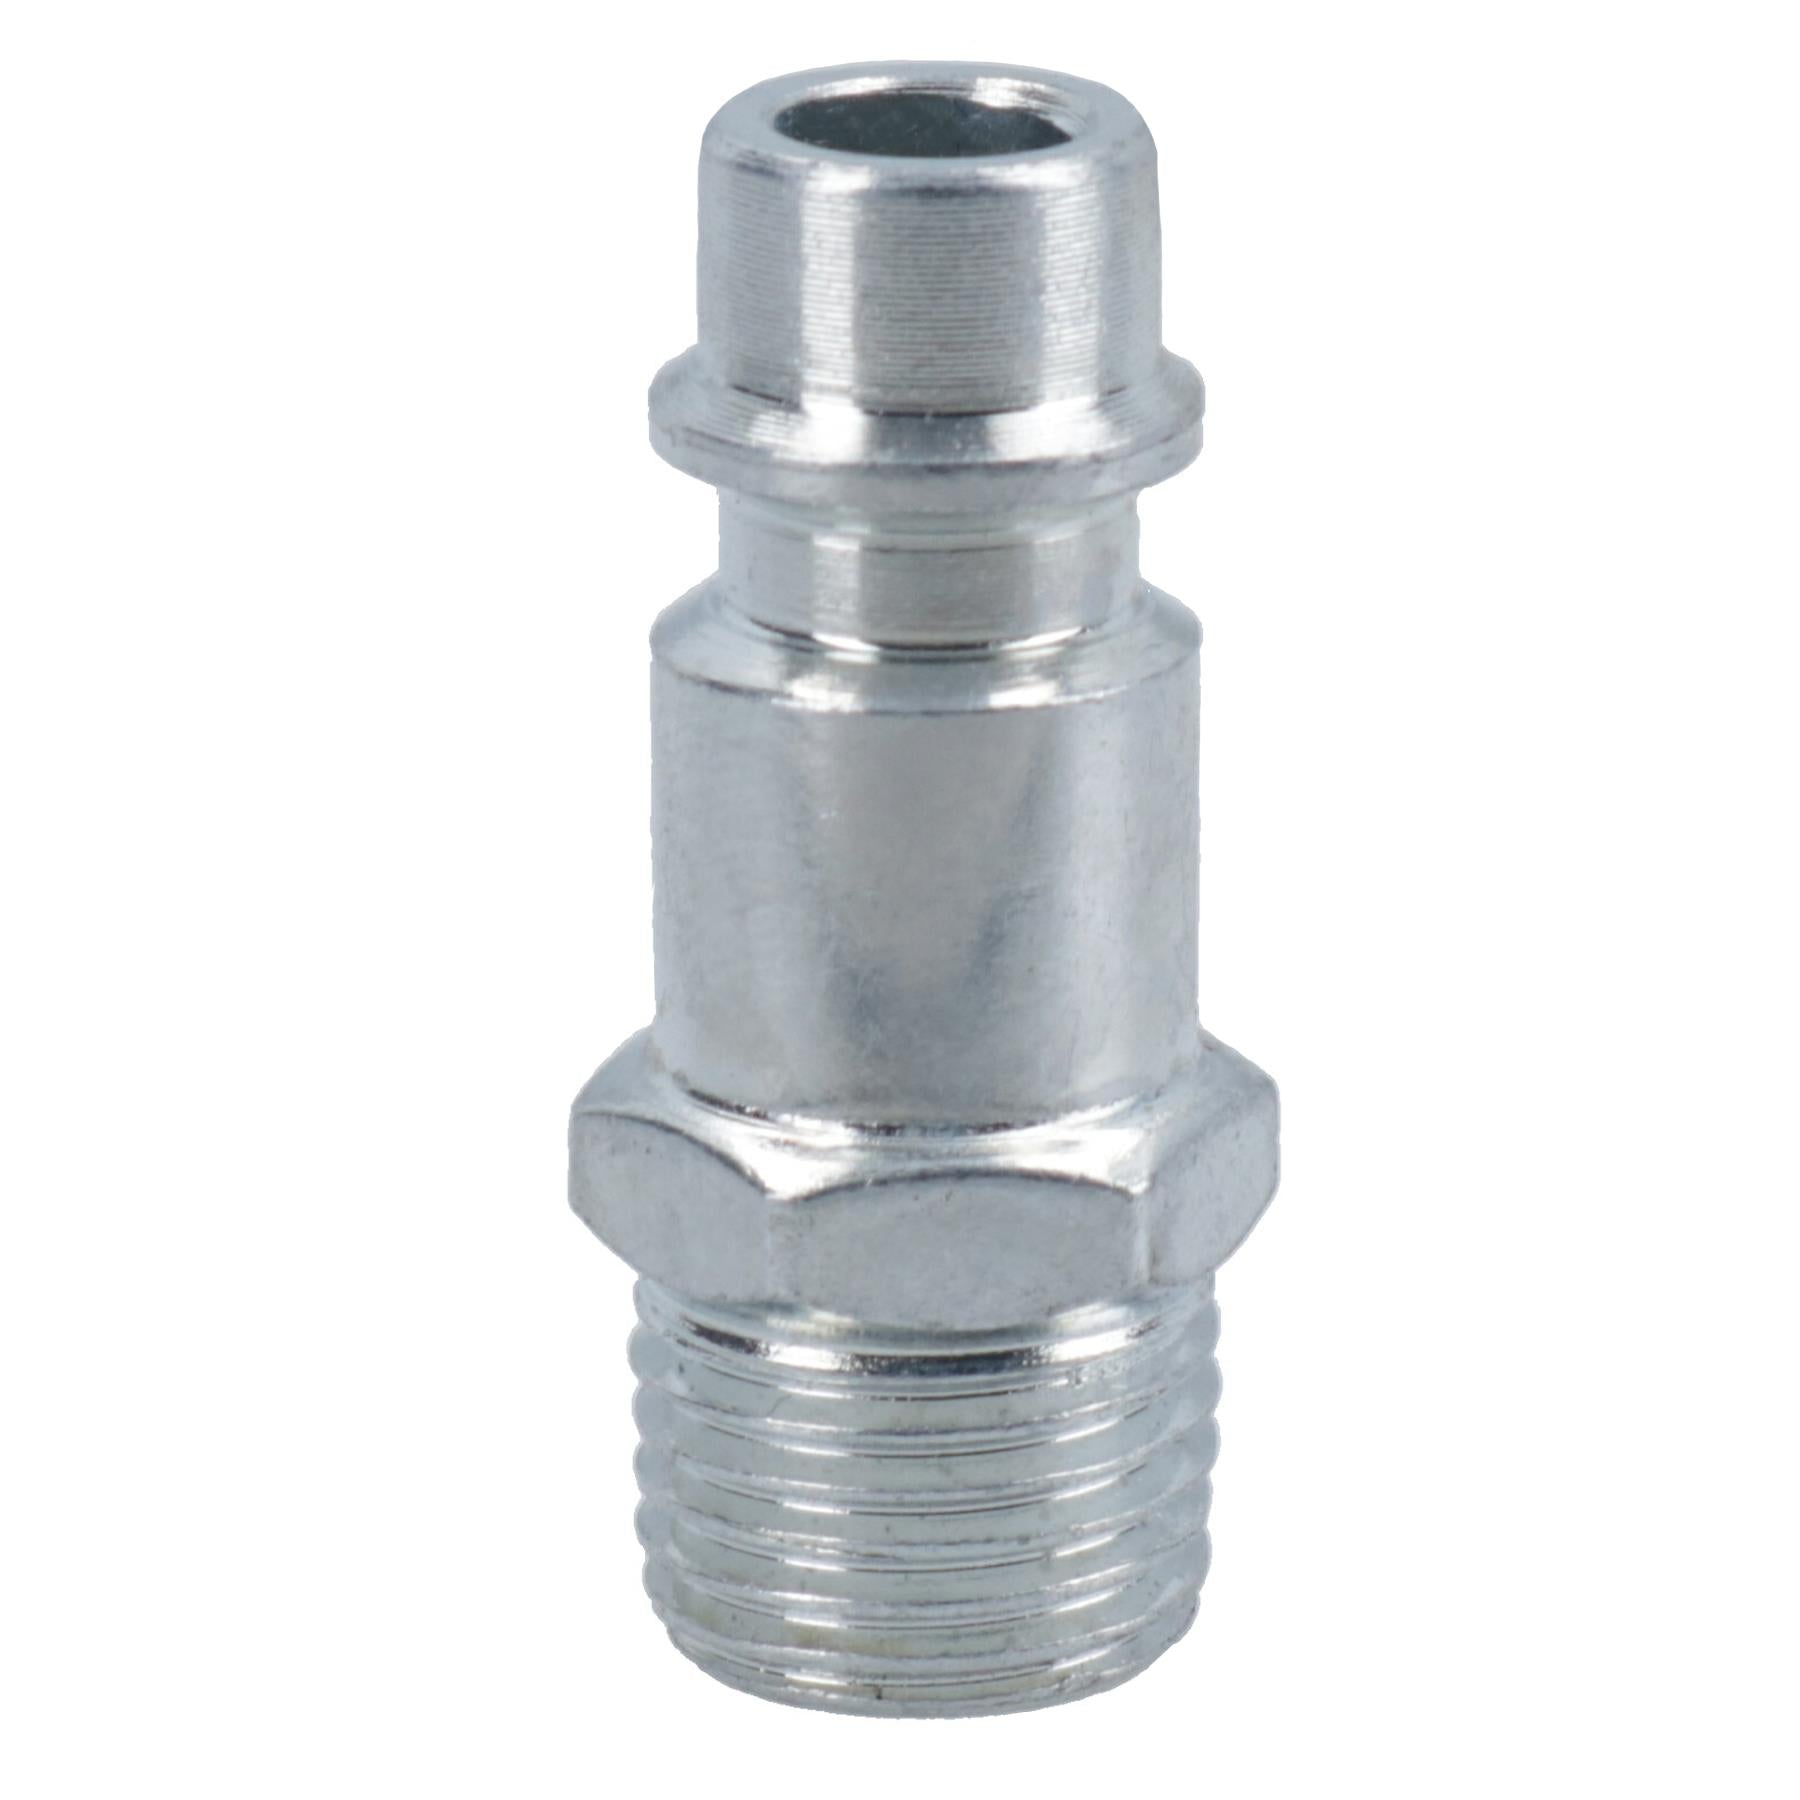 Euro Air Line Quick Release Hose Fitting Connector 1/4 BSP Male Thread